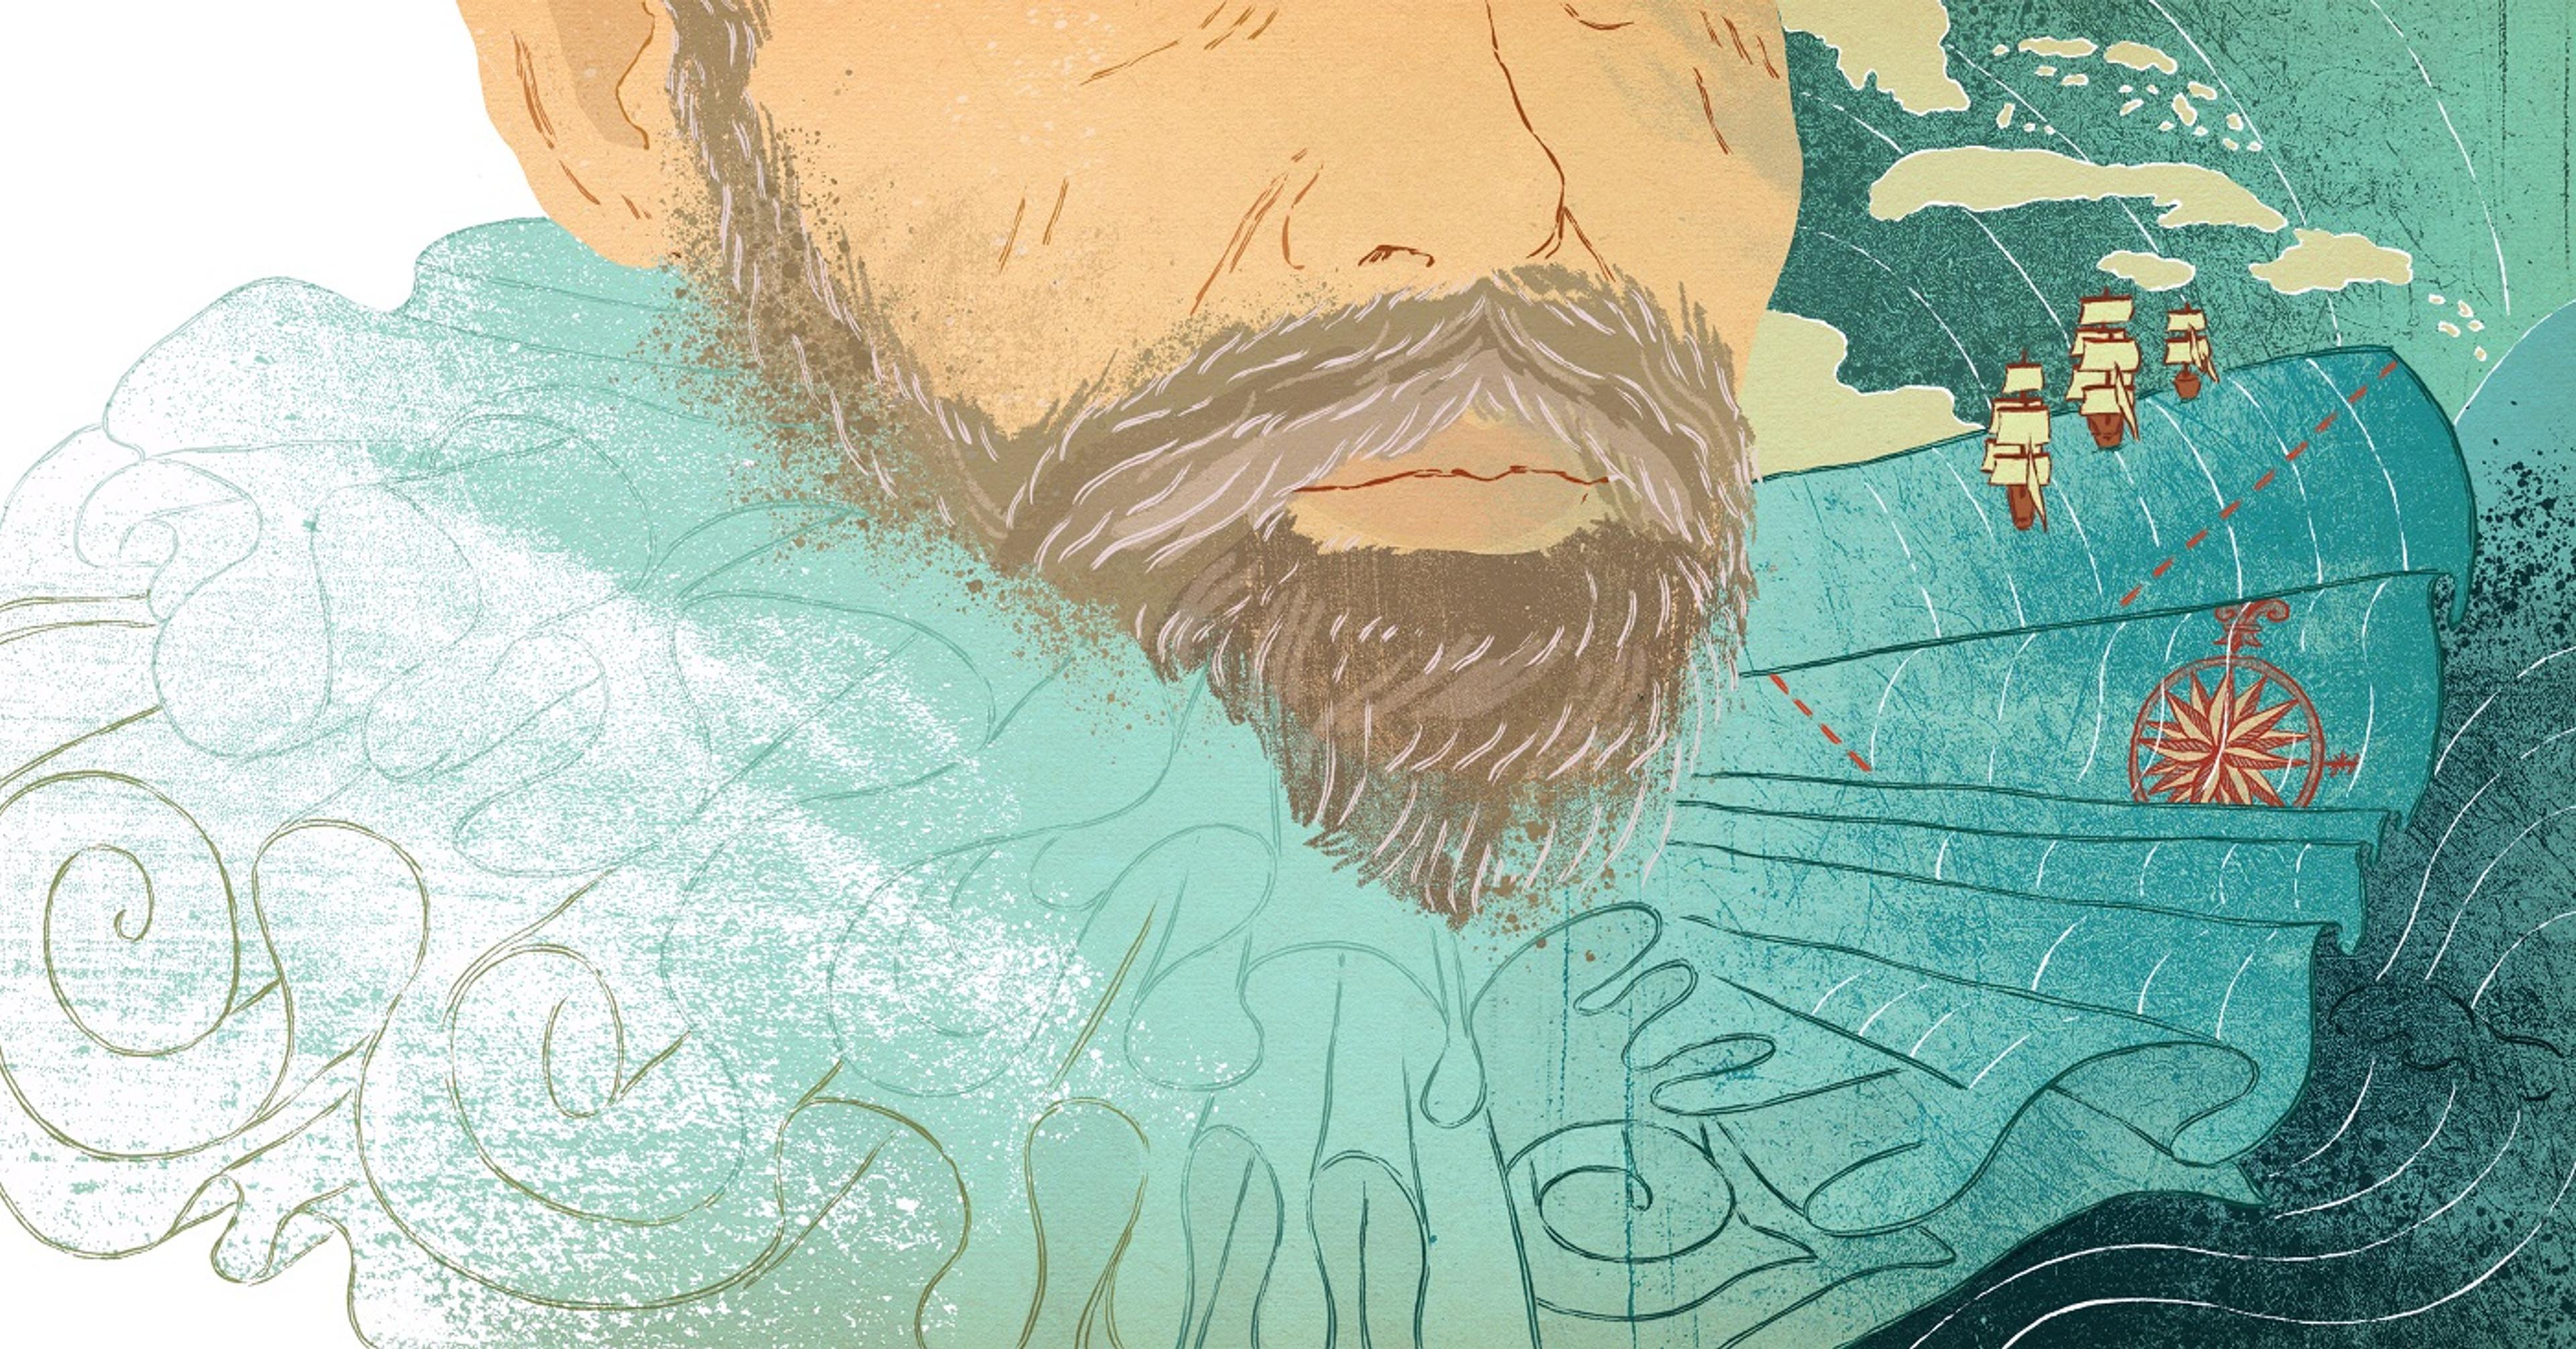 Colour illustration with a range of blues of a bearded man wearing a ruff with the ruffs on one side transforming into a seascape and map with three small ships heading in the direction of some islands in the distance